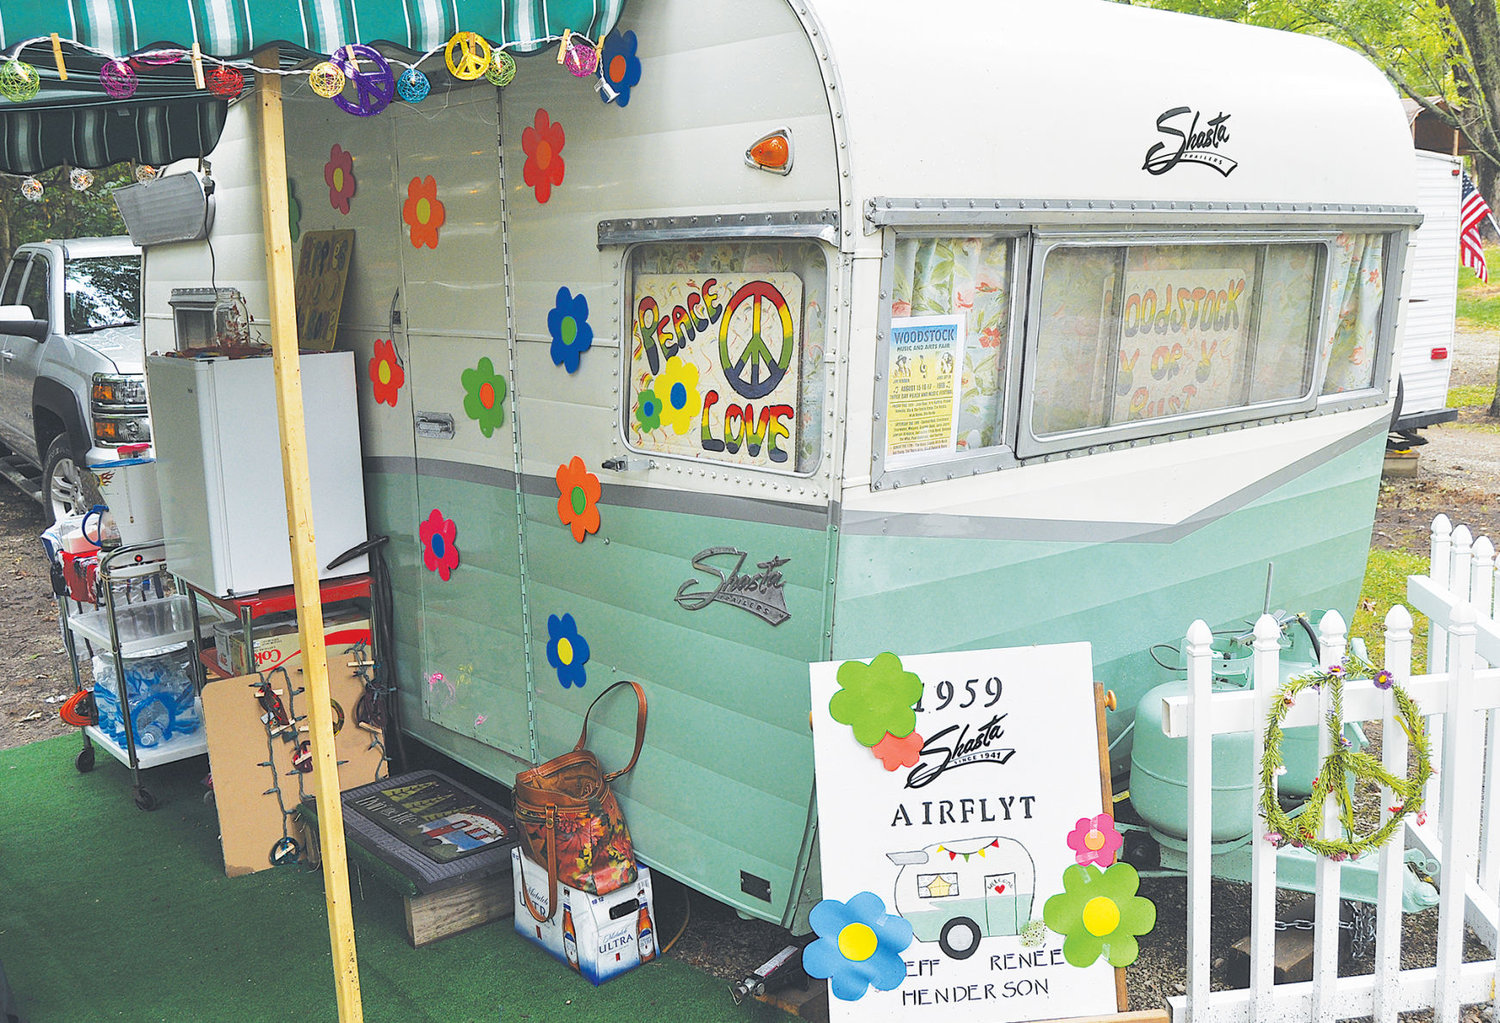 Jeff and Renee Henderson's 1959 Shasta Airflyte is decorated for the Woodstock theme at this weekend's Mid-Central Indiana Vintage Camper Rally at KOA Campground.